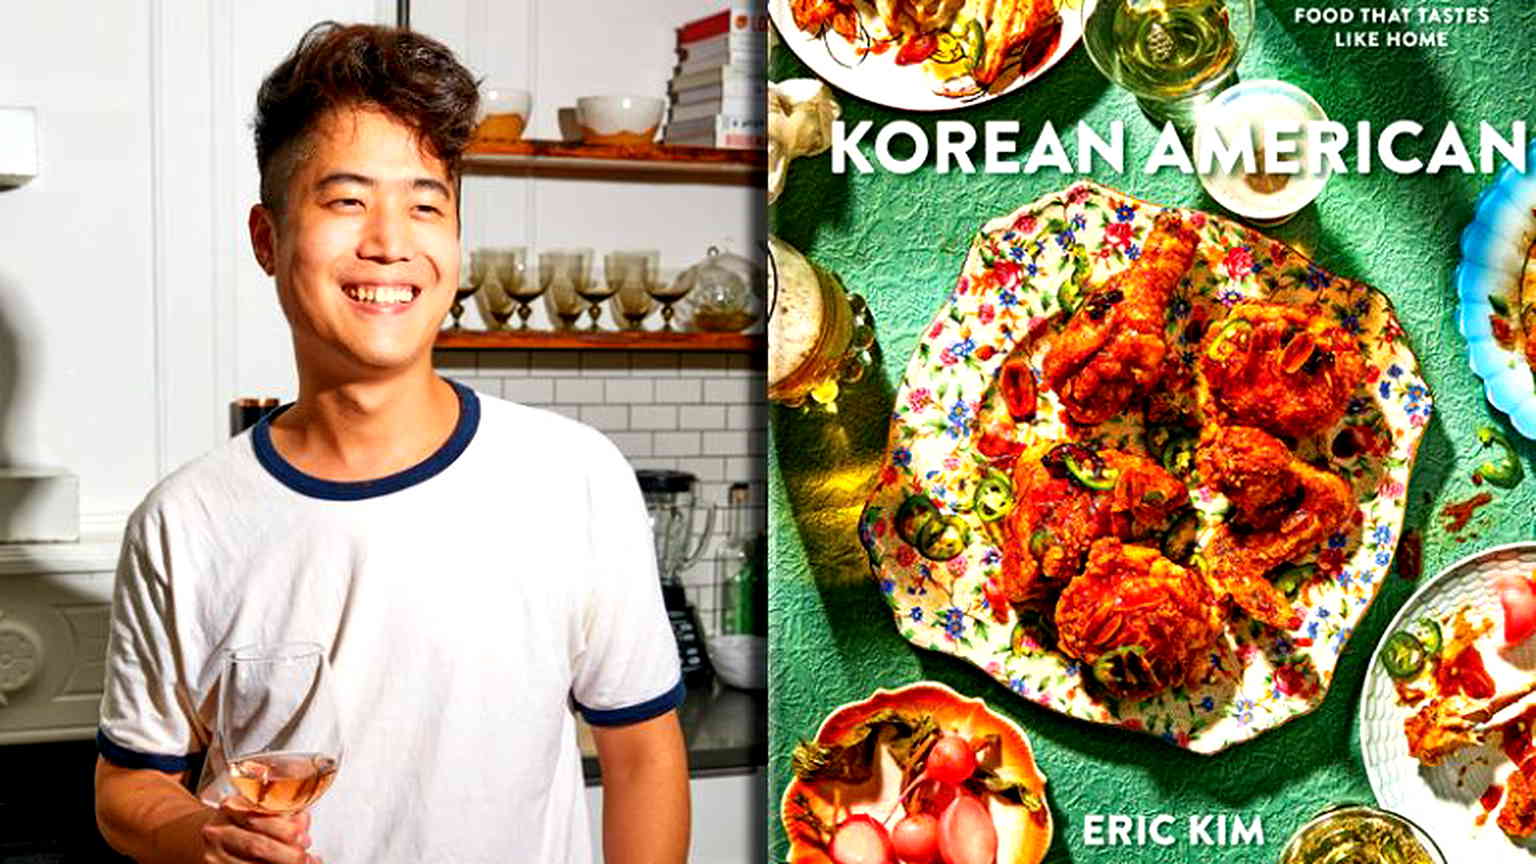 NYT food writer Eric Kim’s new cookbook ‘Korean American’ will make you cry (and not from onions)